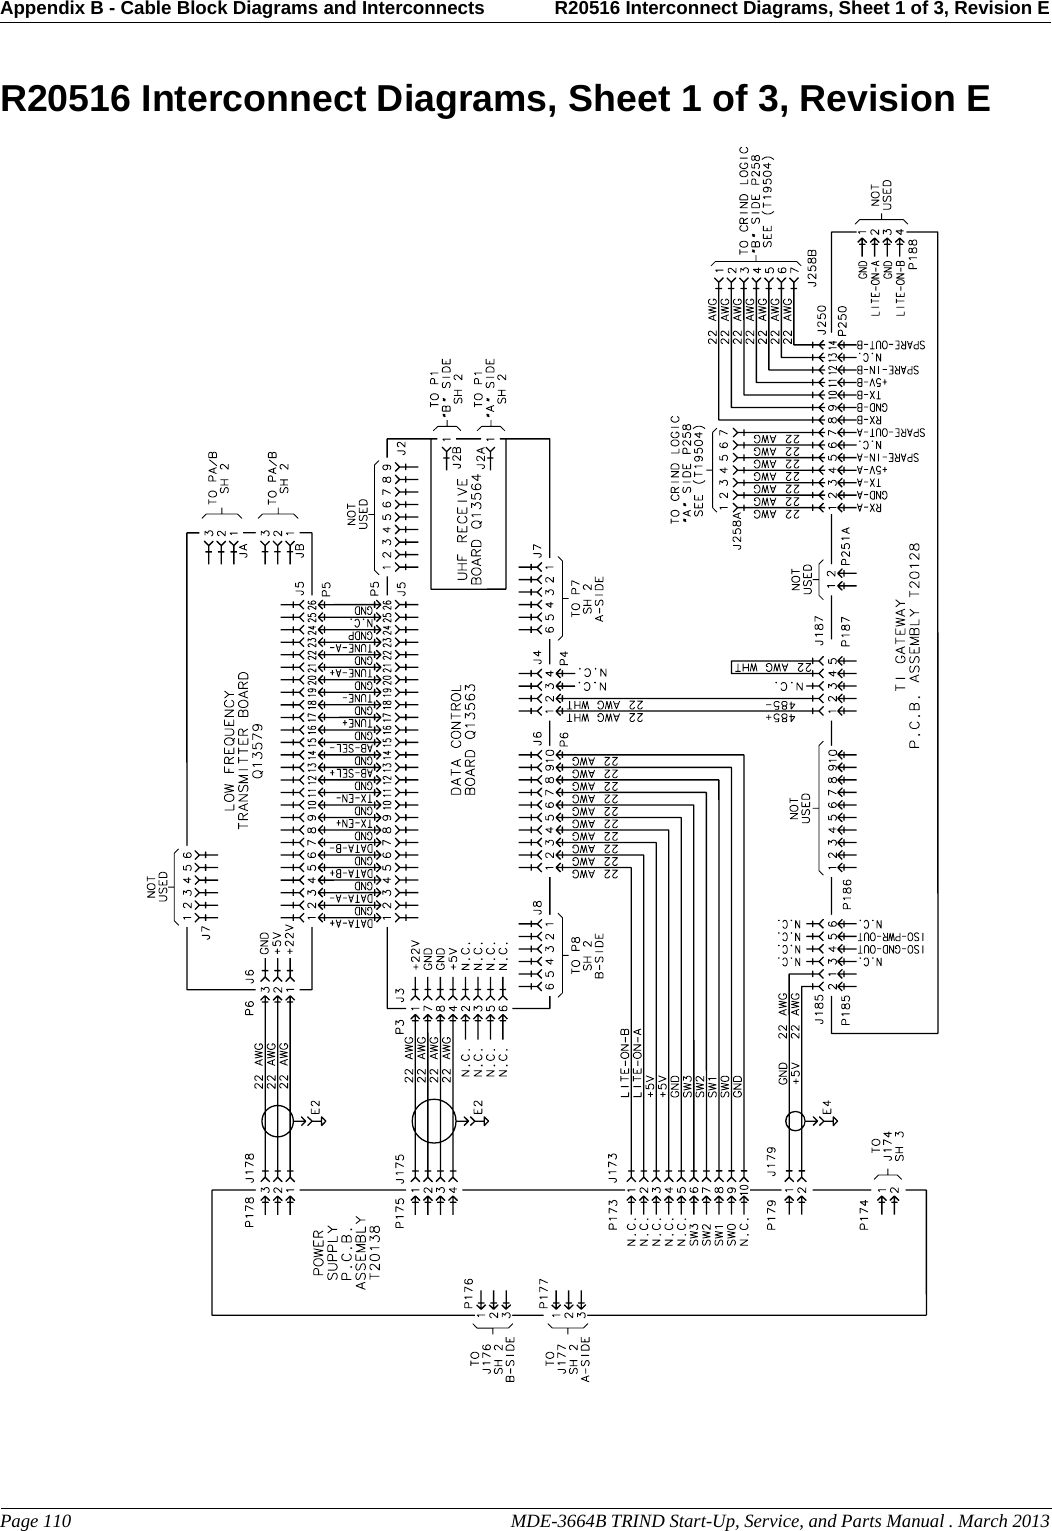 Appendix B - Cable Block Diagrams and Interconnects R20516 Interconnect Diagrams, Sheet 1 of 3, Revision EPage 110                                                                                                  MDE-3664B TRIND Start-Up, Service, and Parts Manual . March 2013PreliminaryR20516 Interconnect Diagrams, Sheet 1 of 3, Revision E